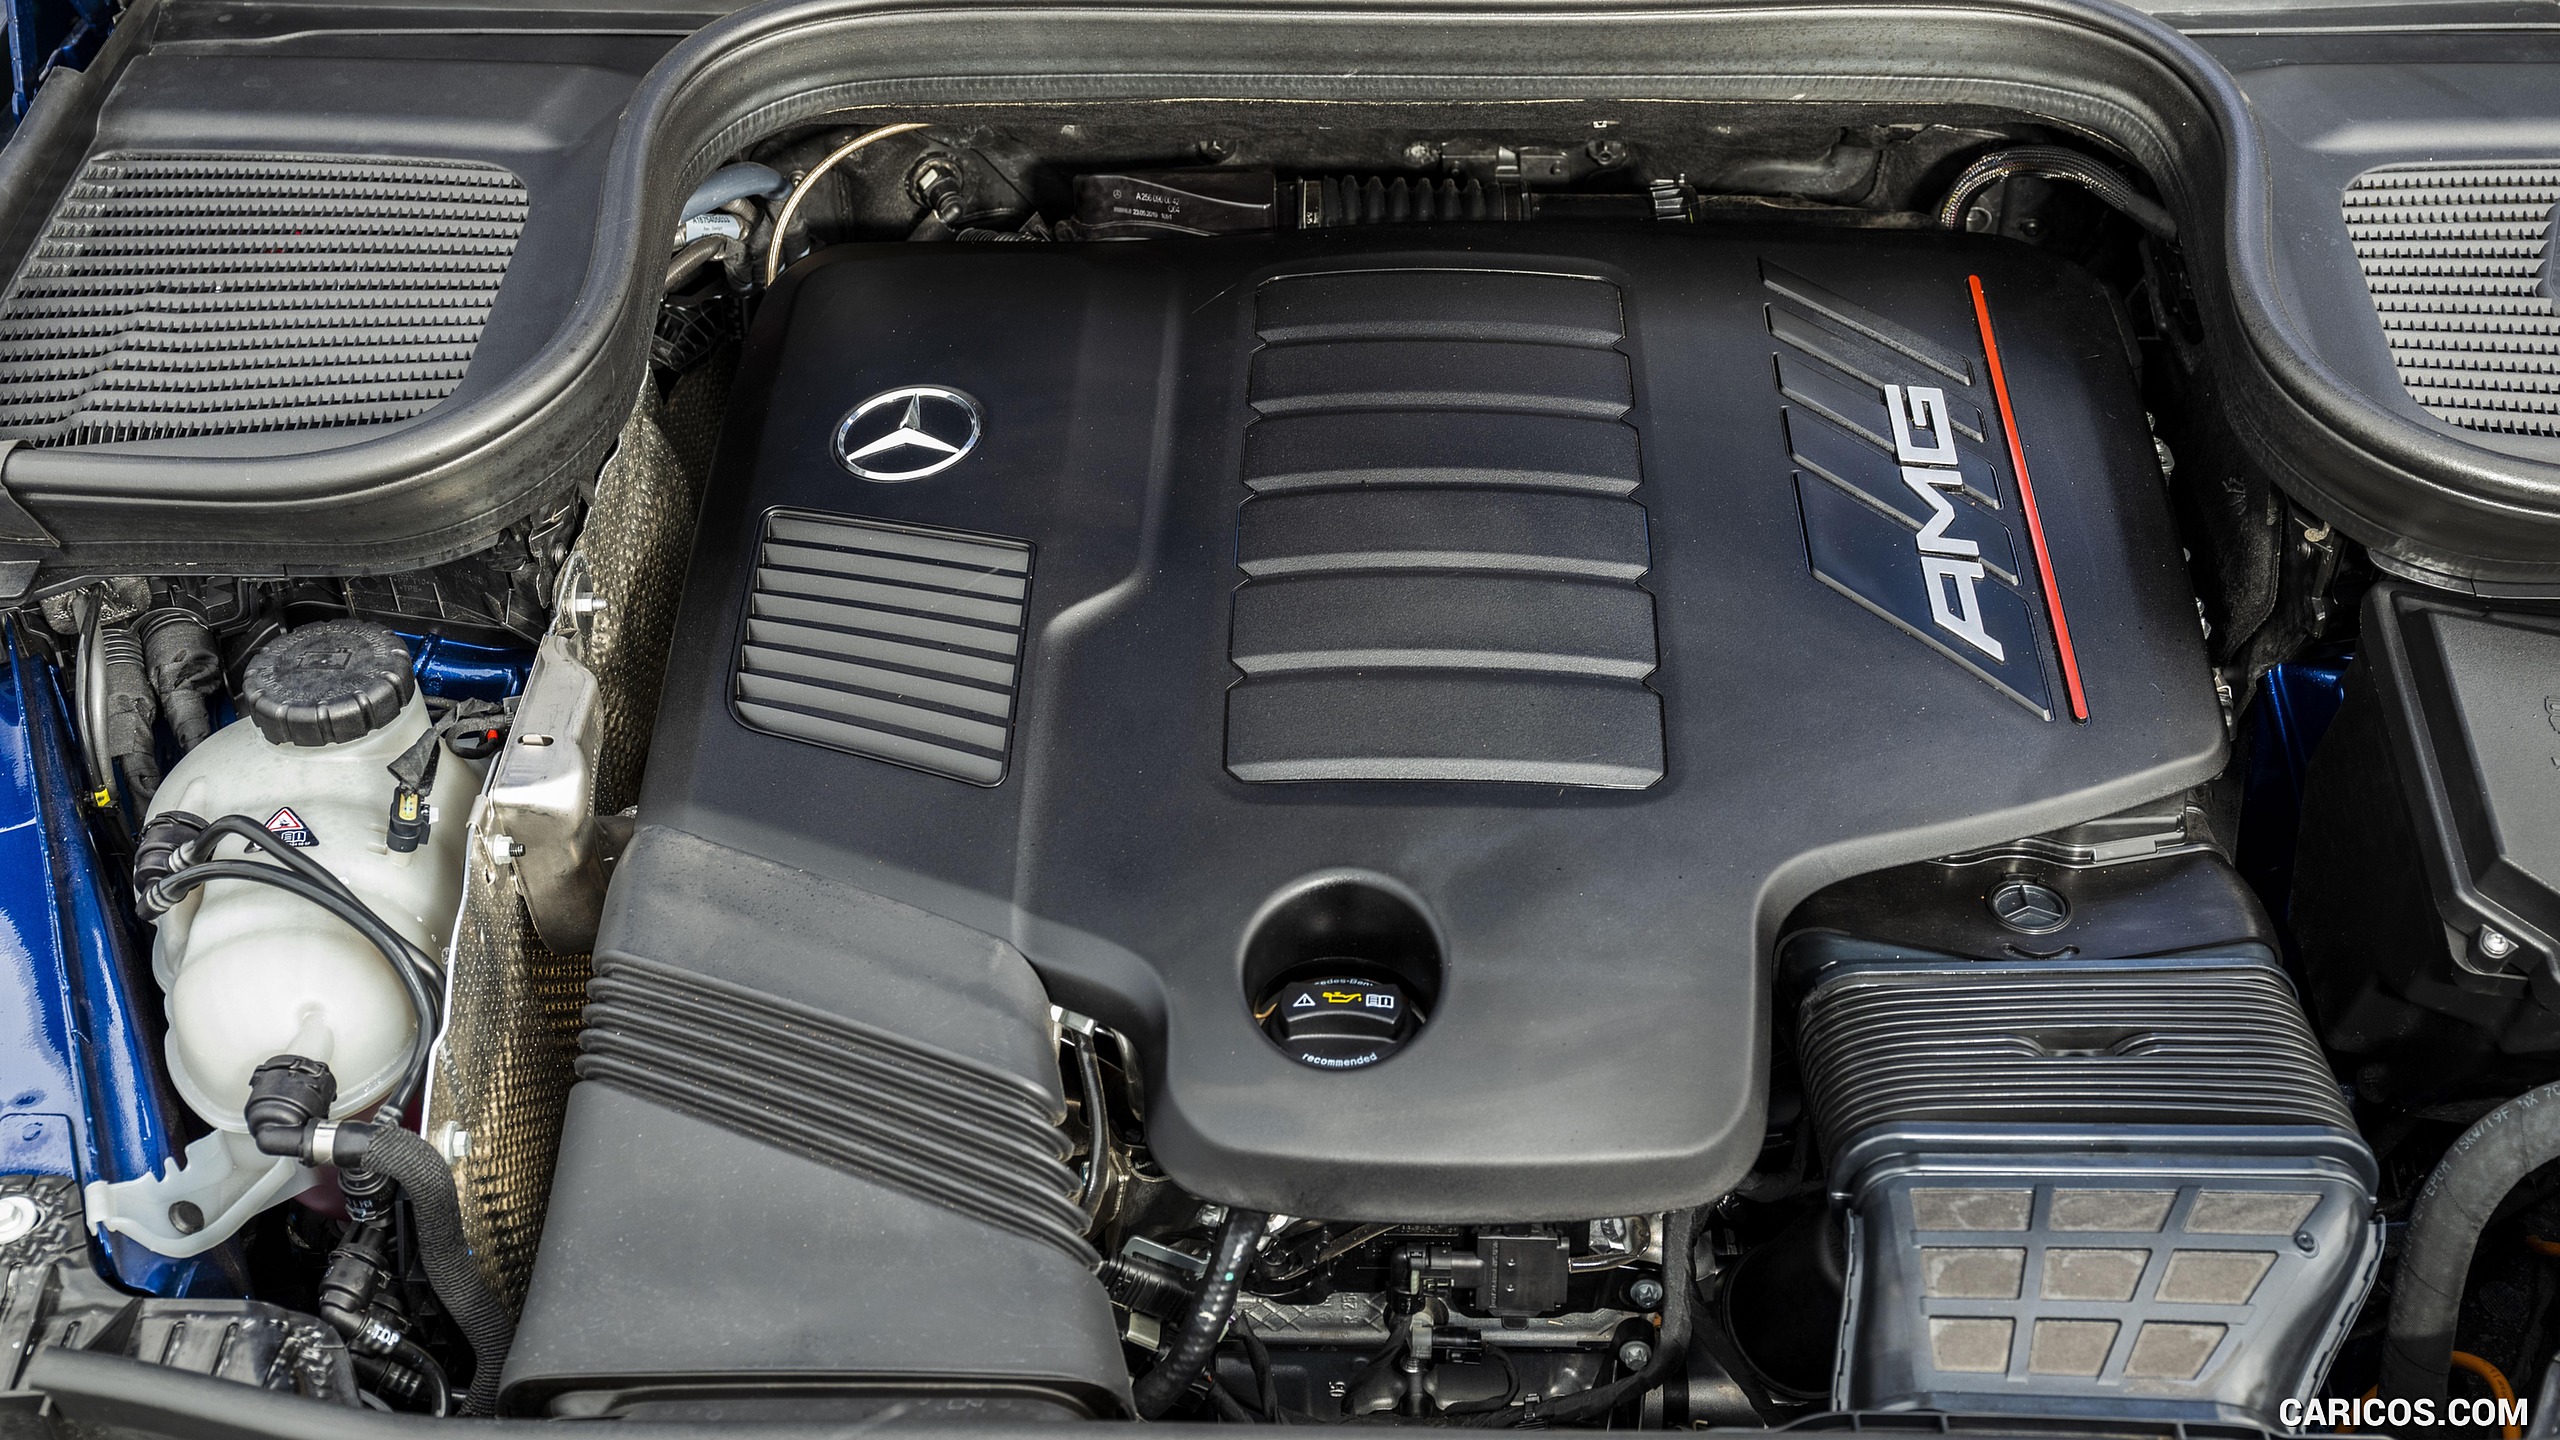 2021 Mercedes-AMG GLE 53 4MATIC Coupe - Engine, #56 of 178